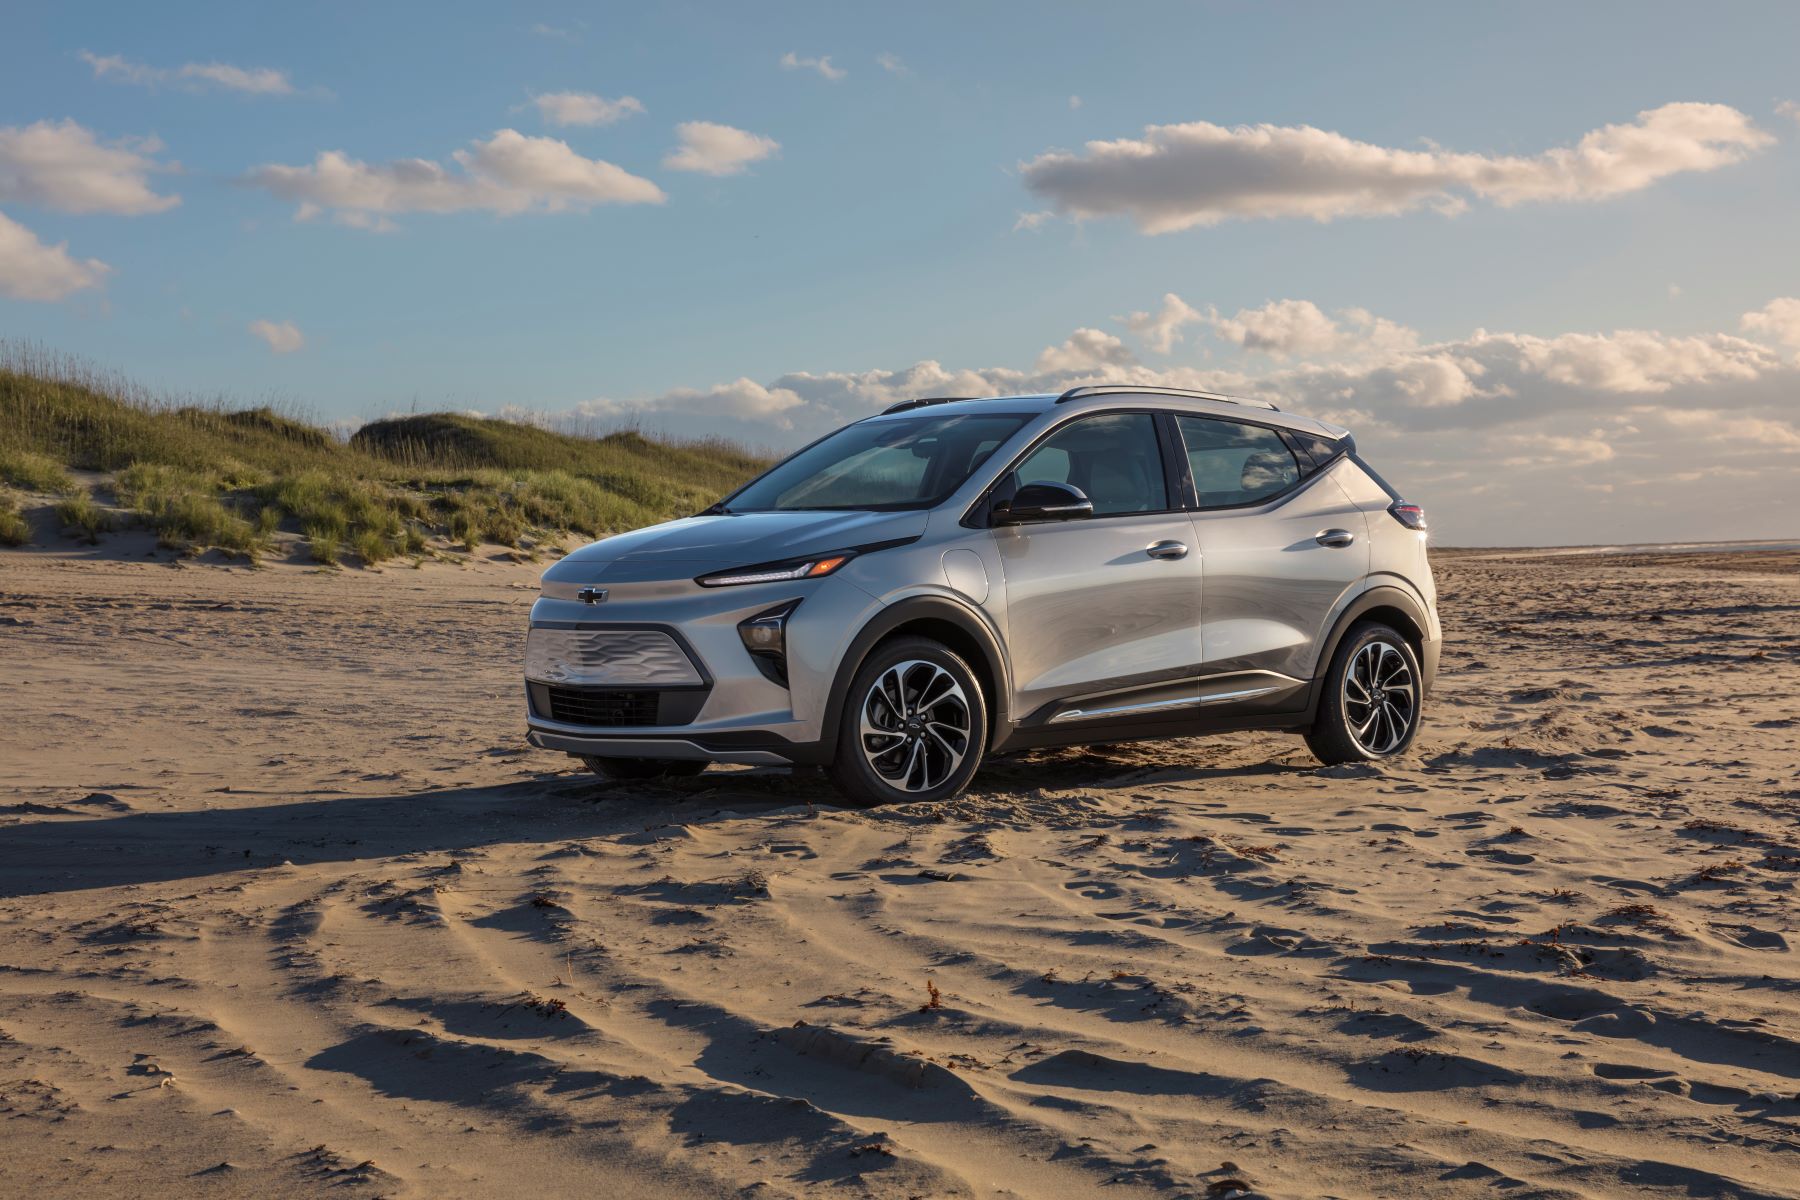 A silver gray 2022 Chevy Bolt EUV electric vehicle (EV) compact SUV parked on a sandy beach